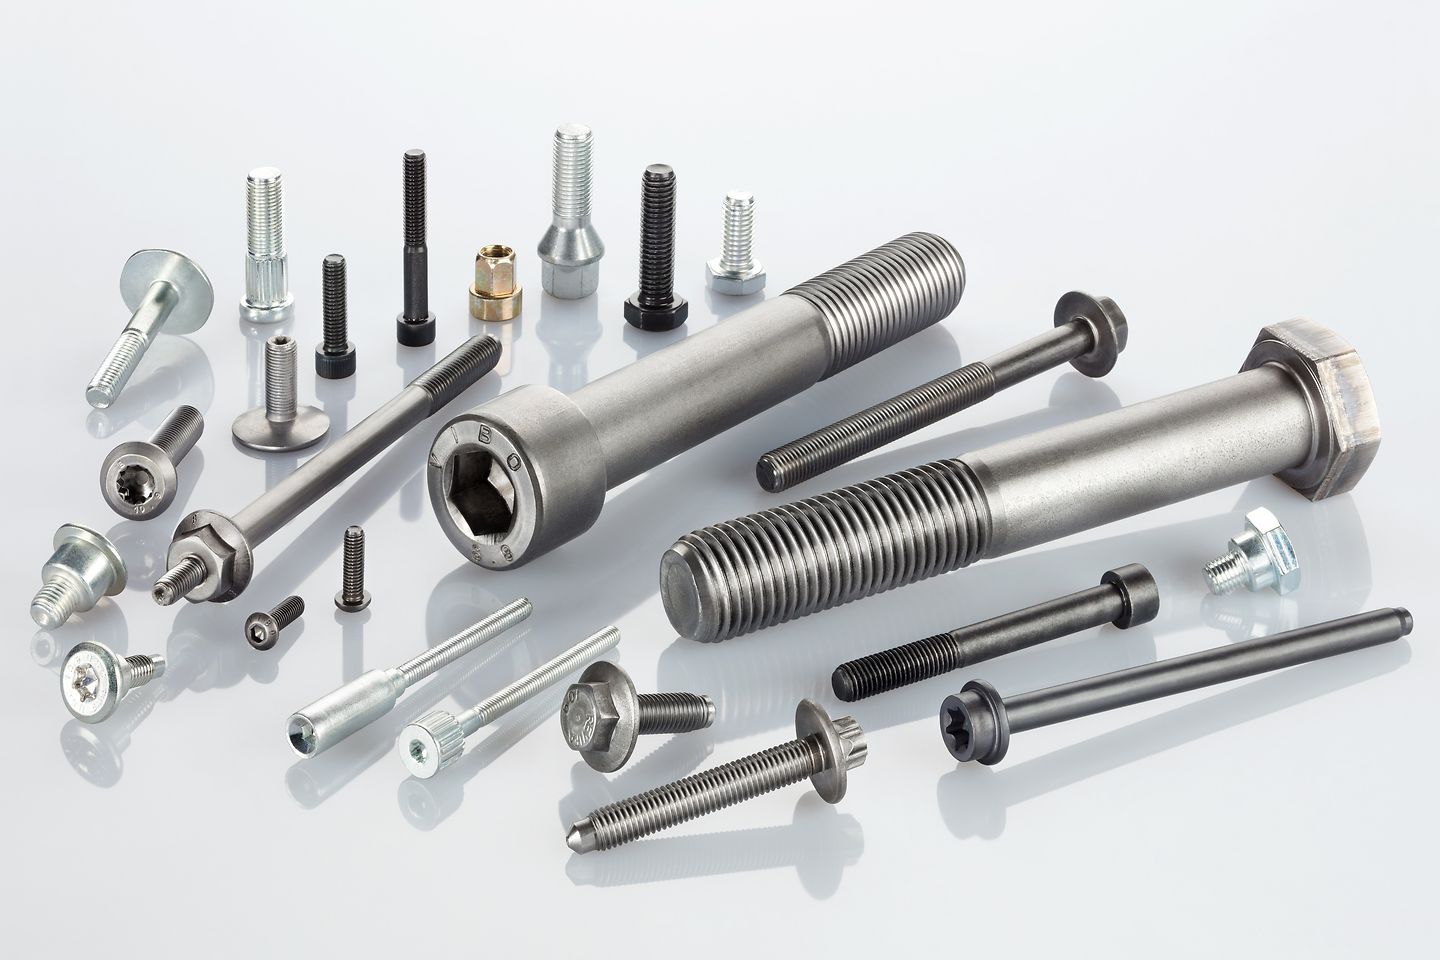 Bonderite L-FM FL portfolio of polymeric coatings is used for the production of metal working parts such as screws